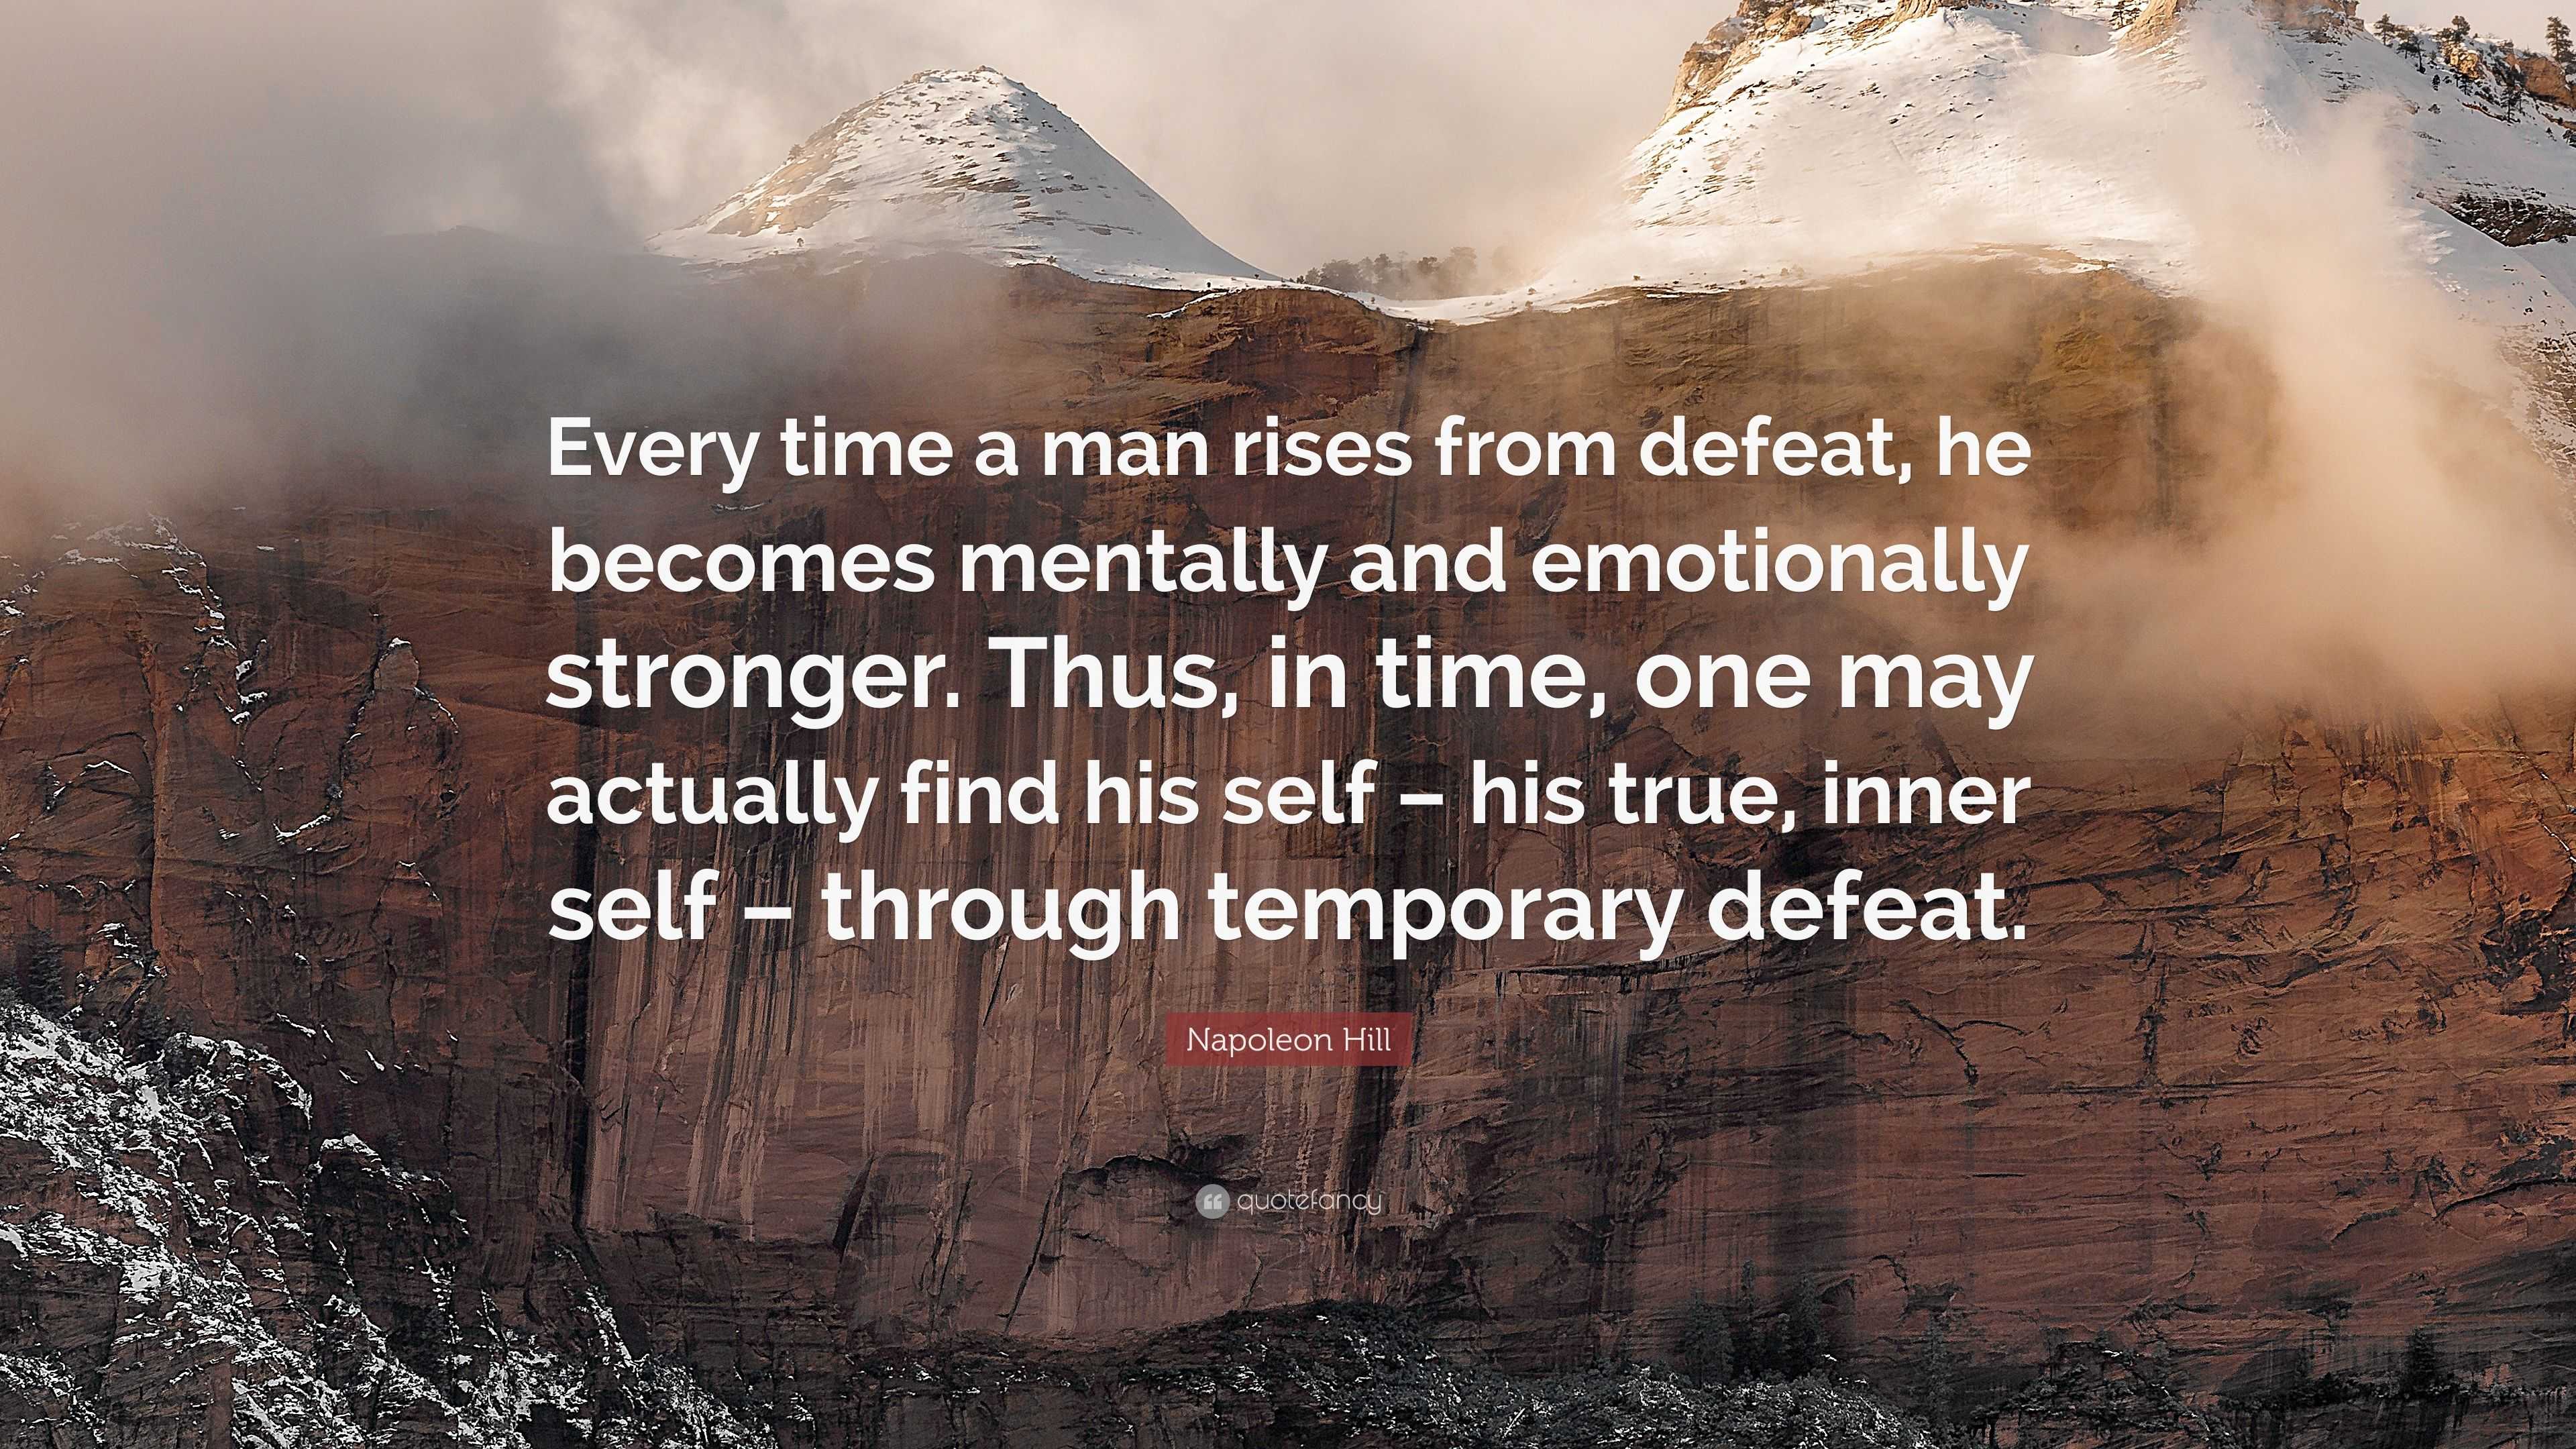 Napoleon Hill Quote: “Every time a man rises from defeat, he becomes